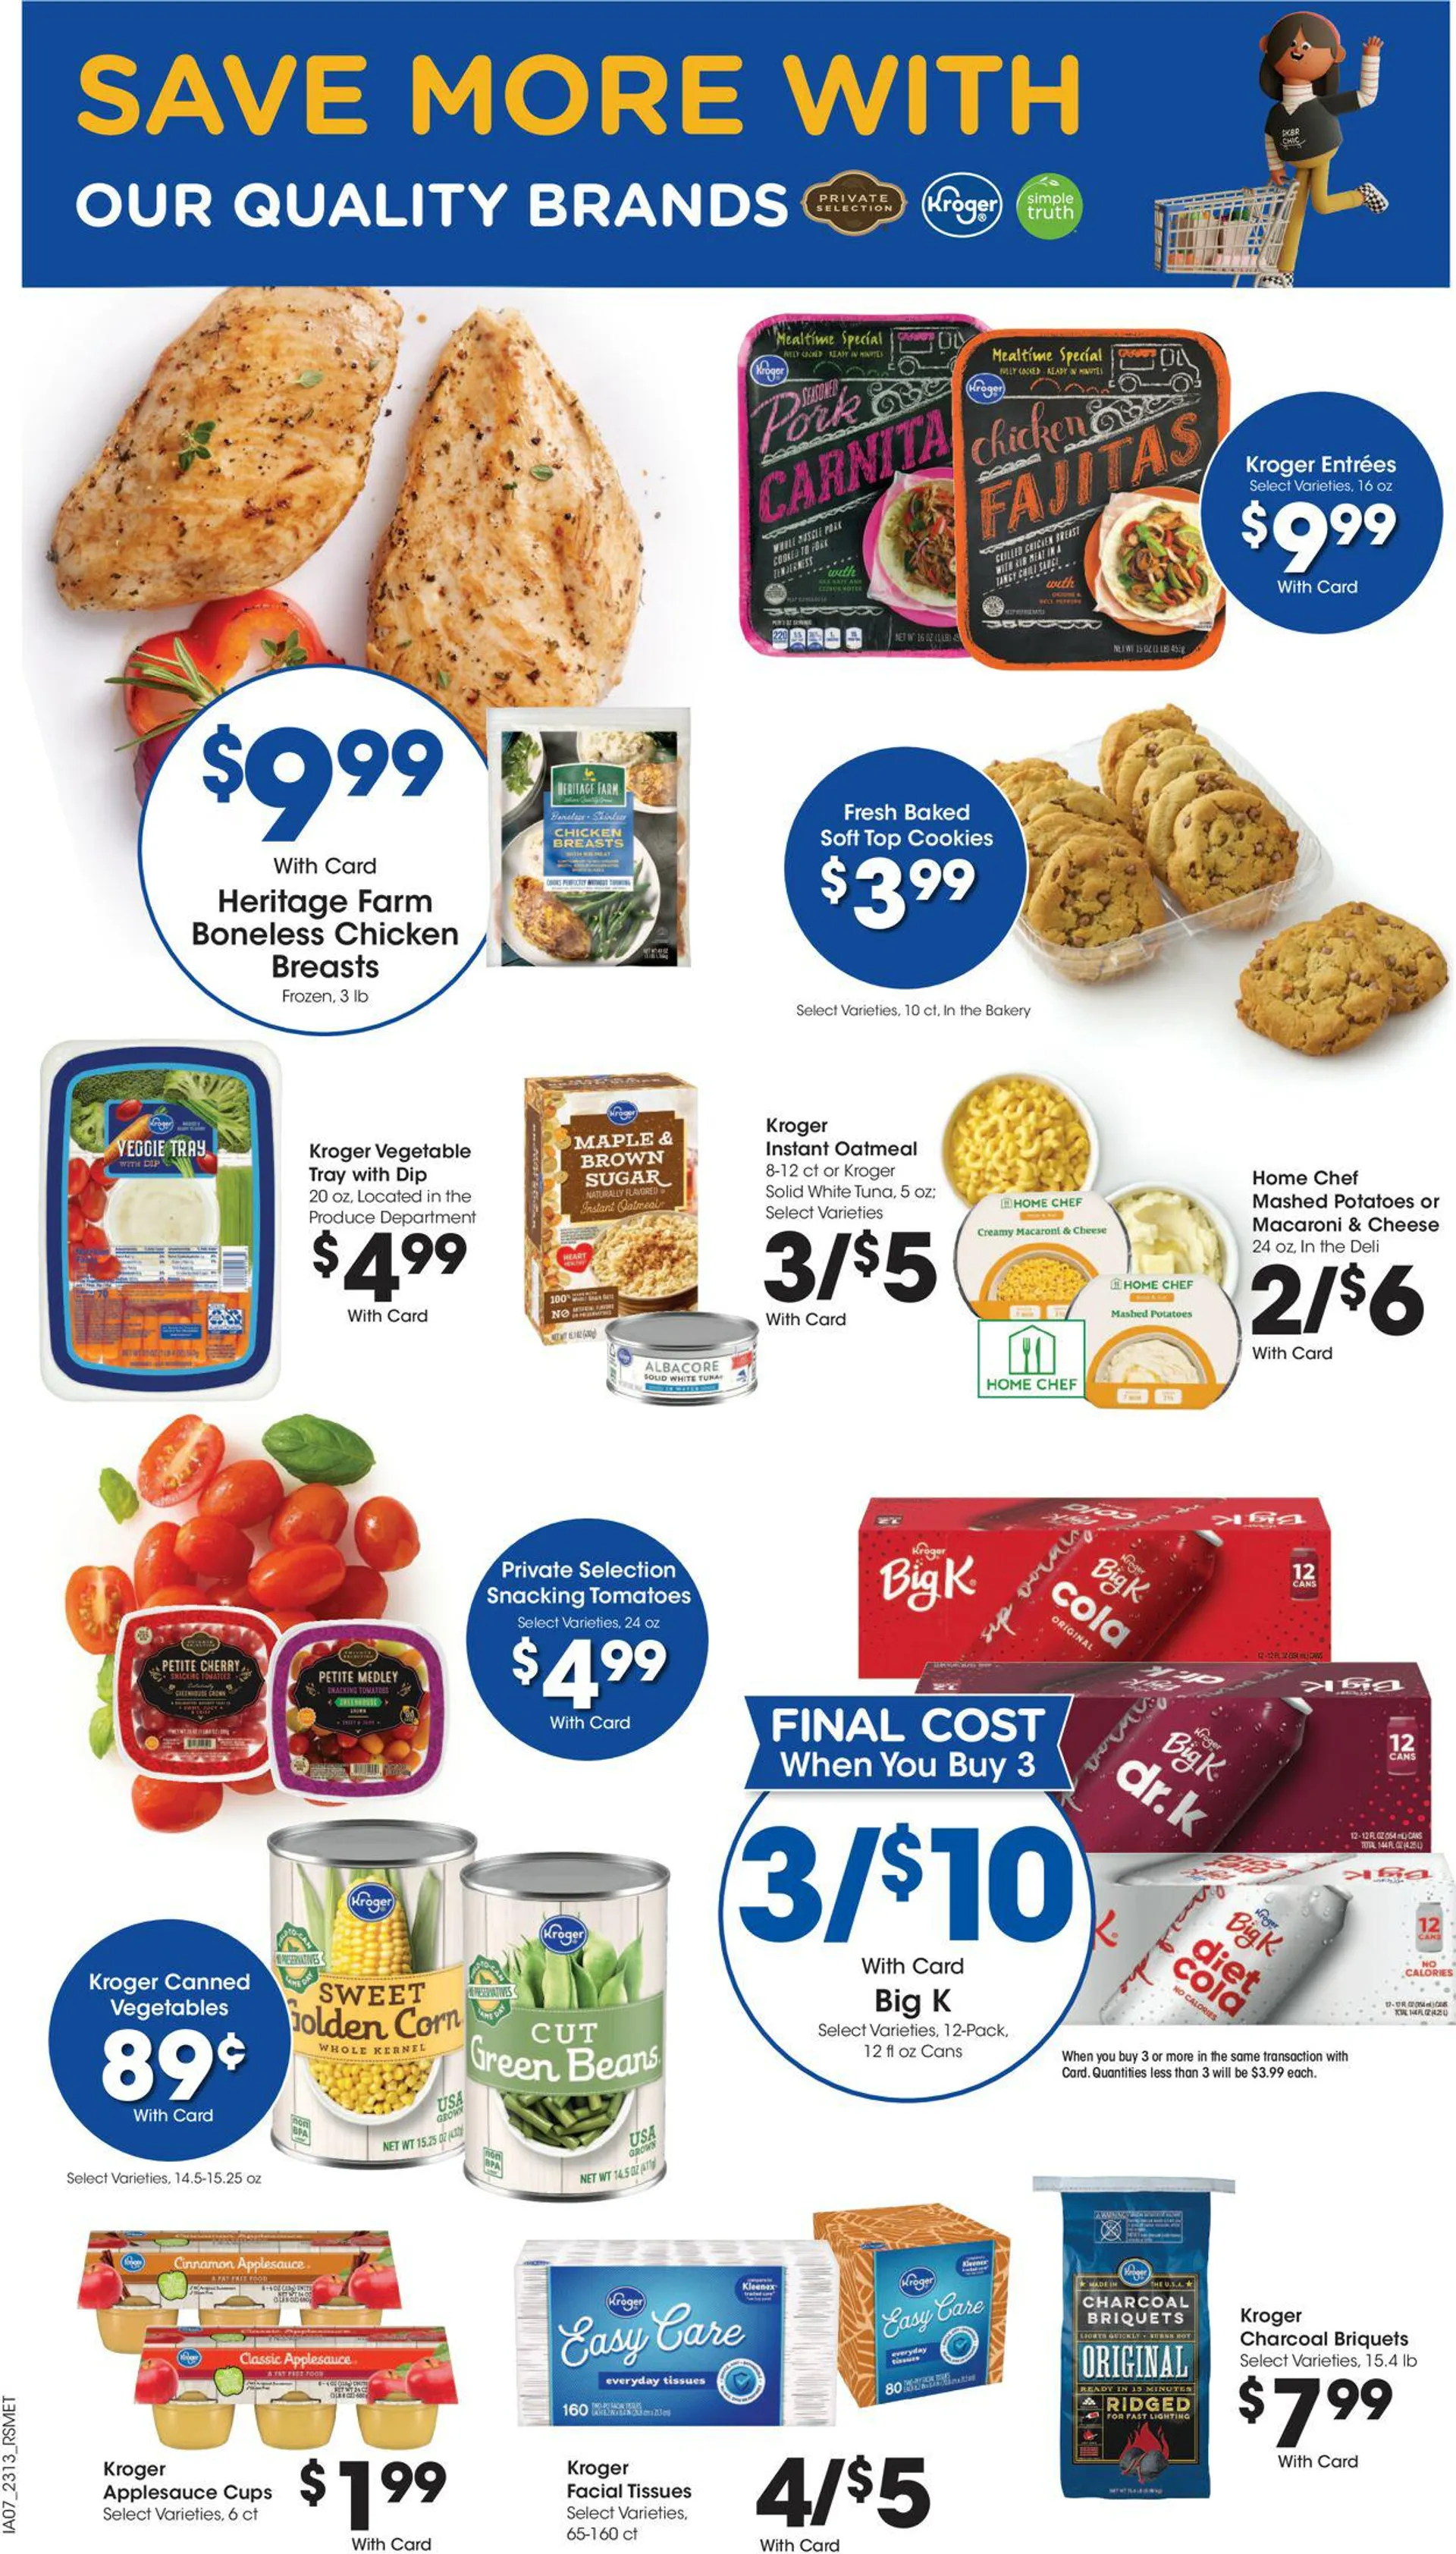 Pick ‘n Save Current weekly ad - 12